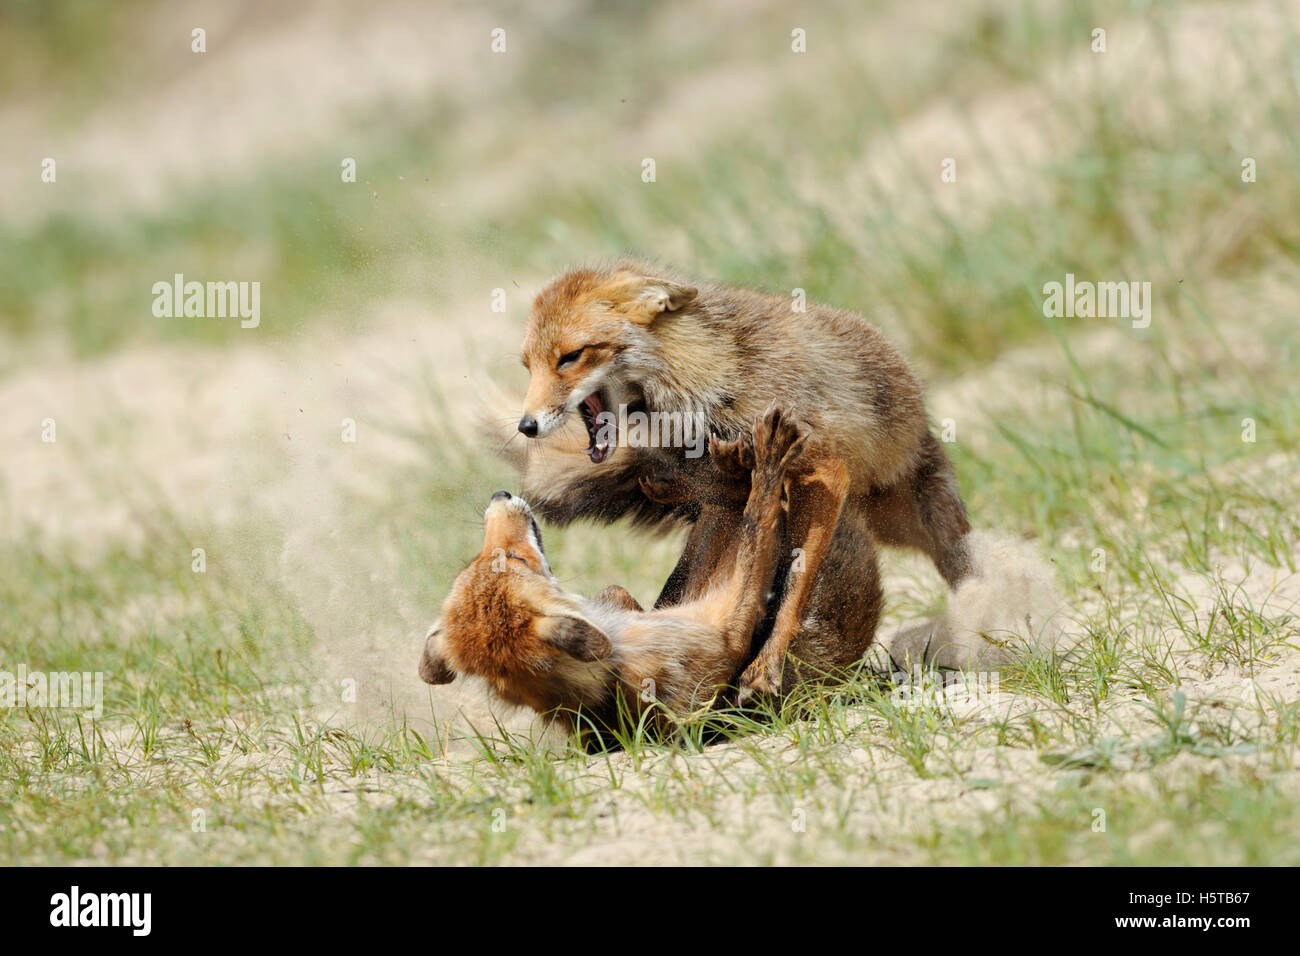 Red Foxes / Rotfuechse ( Vulpes vulpes ) in hard fight, fighting, aggressive territorial behavior, rivals, wildlife, Europe. Stock Photo